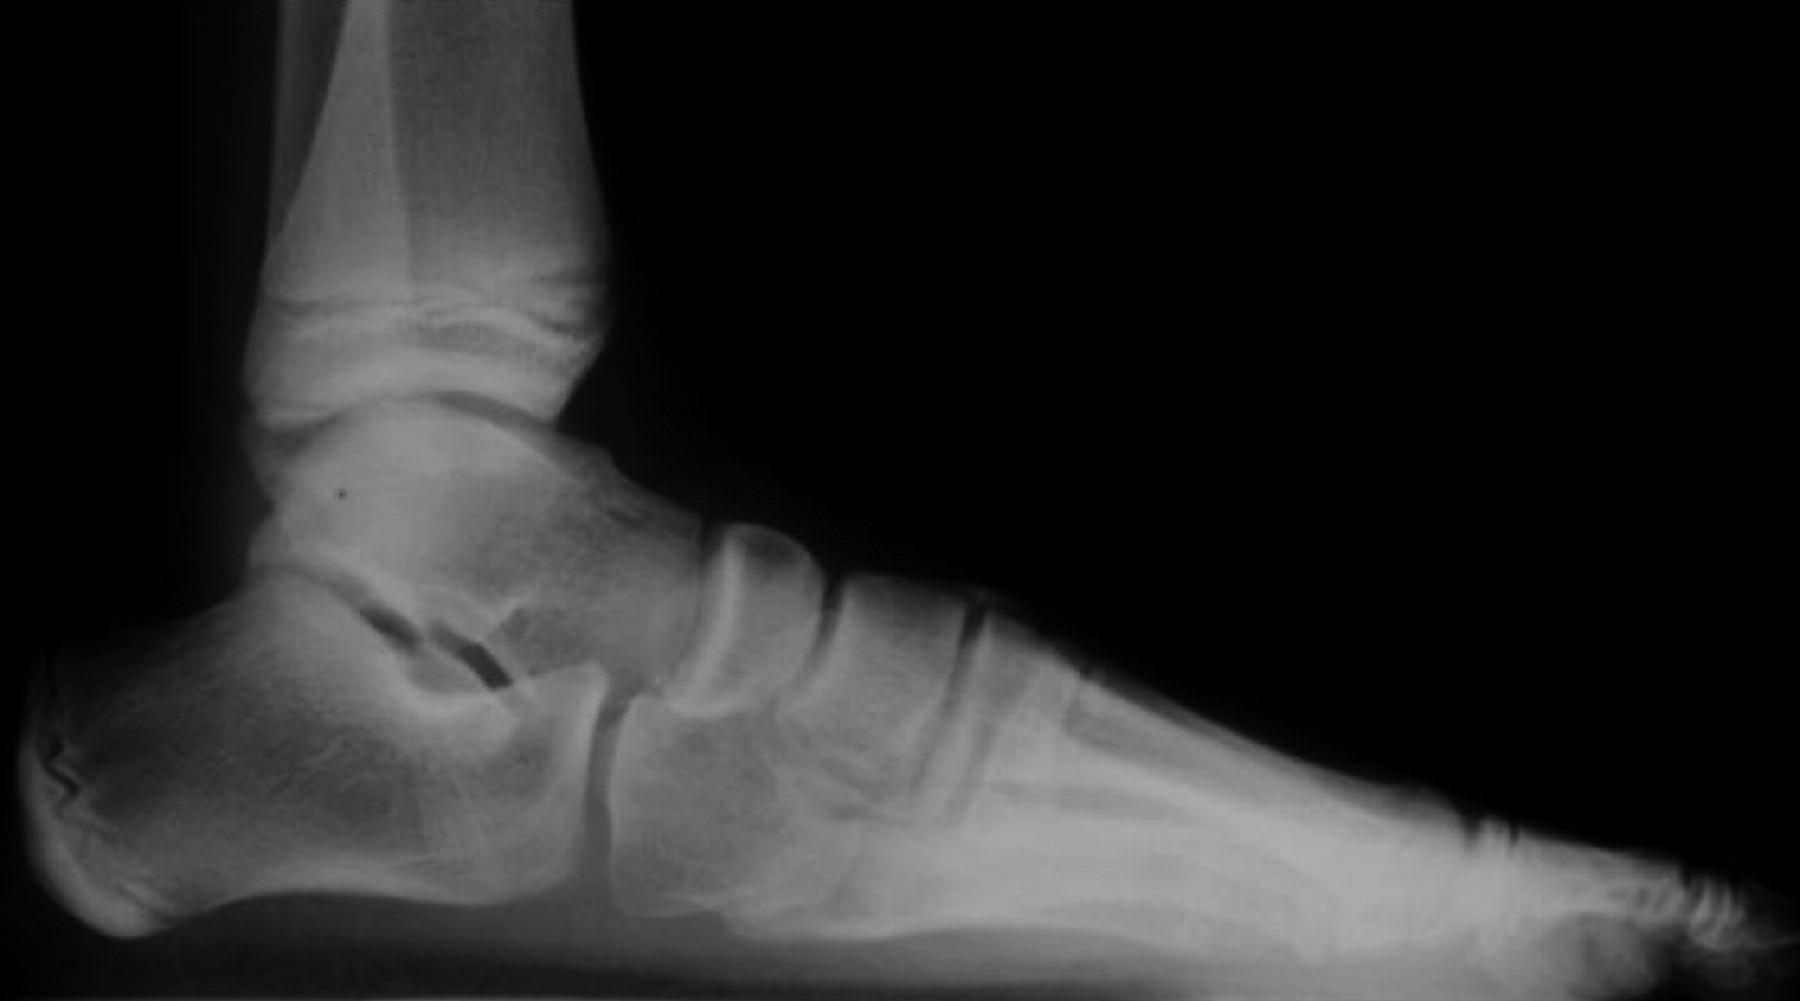 The Incidence And Treatment Of Rocker Bottom Deformity As A Complication Of The Conservative